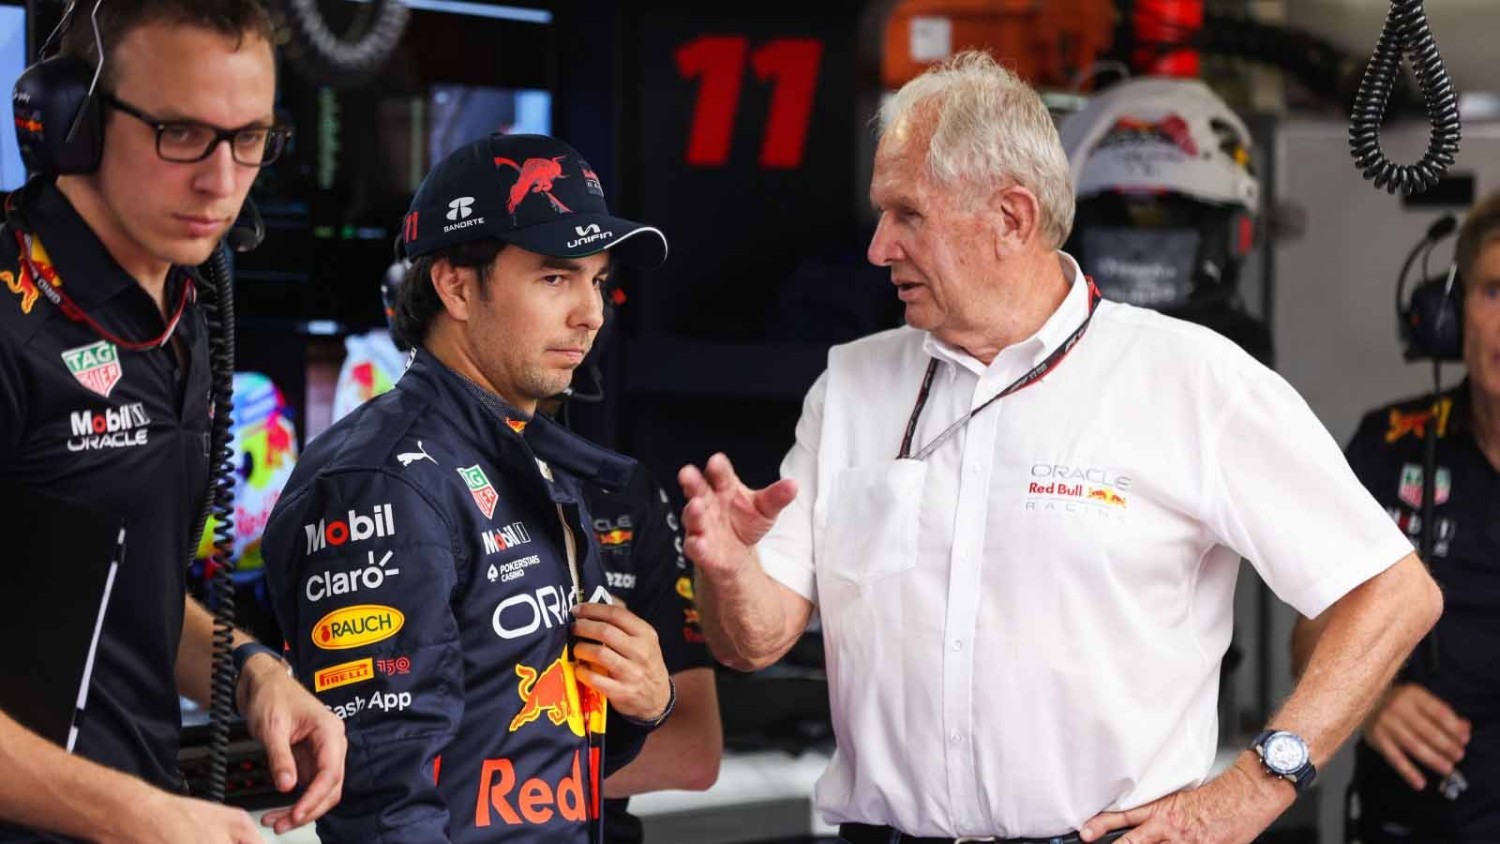 Sergio Perez out again in Q1 talks to Dr. Helmut Marko. "Perez has some weaknesses, this can’t be denied if one car takes pole and the other can’t even exit Q1. But there is nobody who would be a viable replacement for him right now."